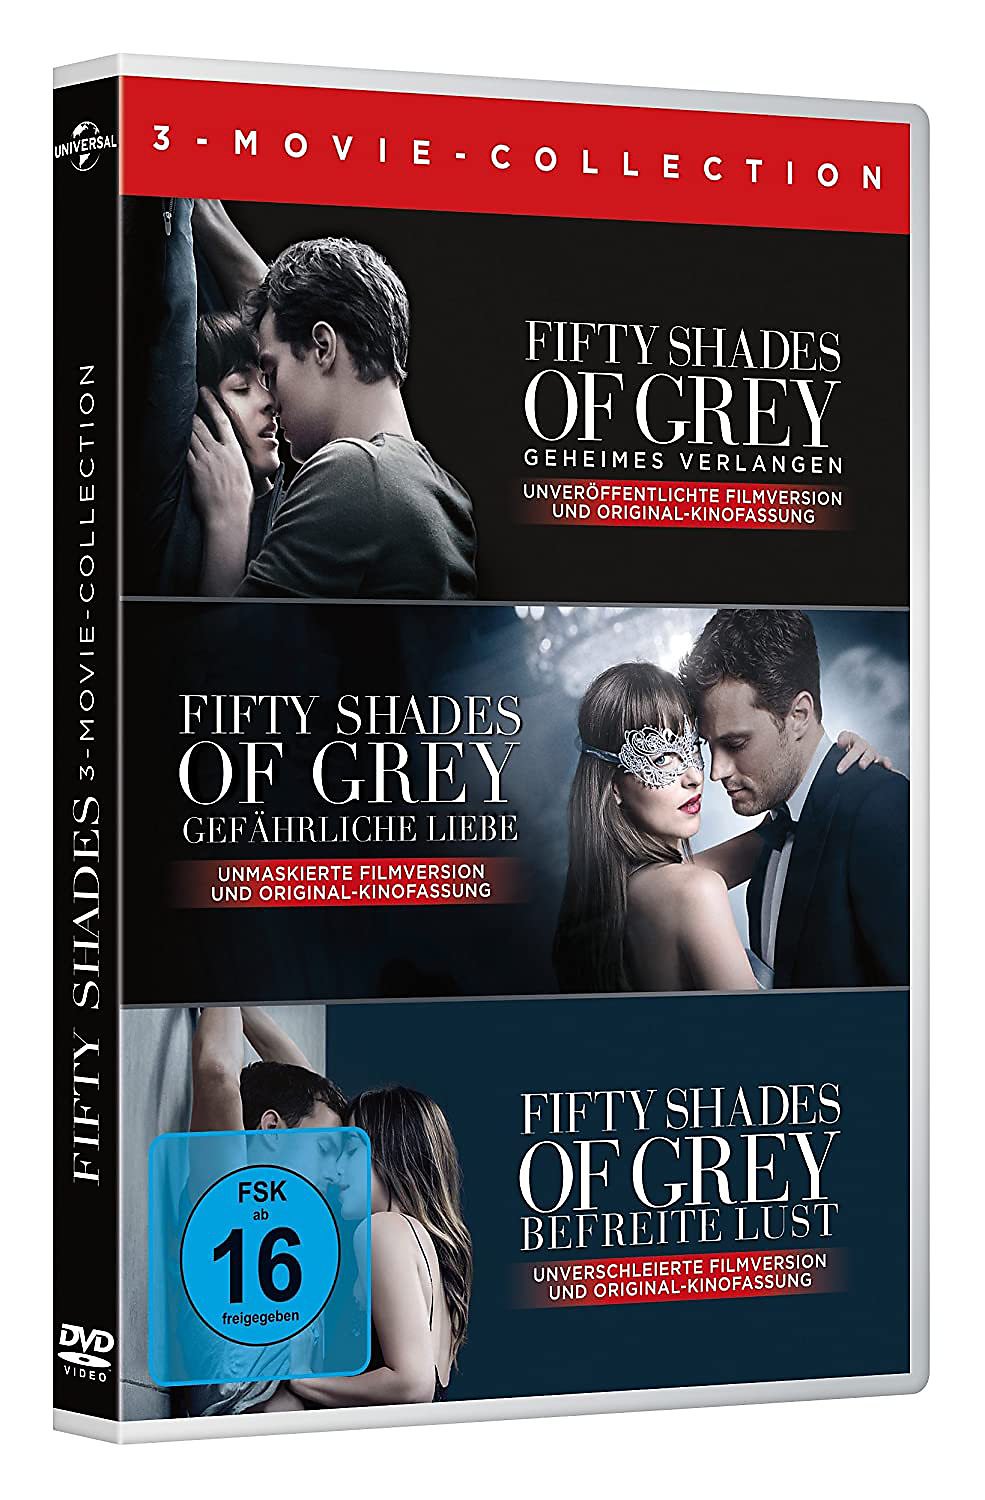 Dvd Fifty Shades Of Grey 3